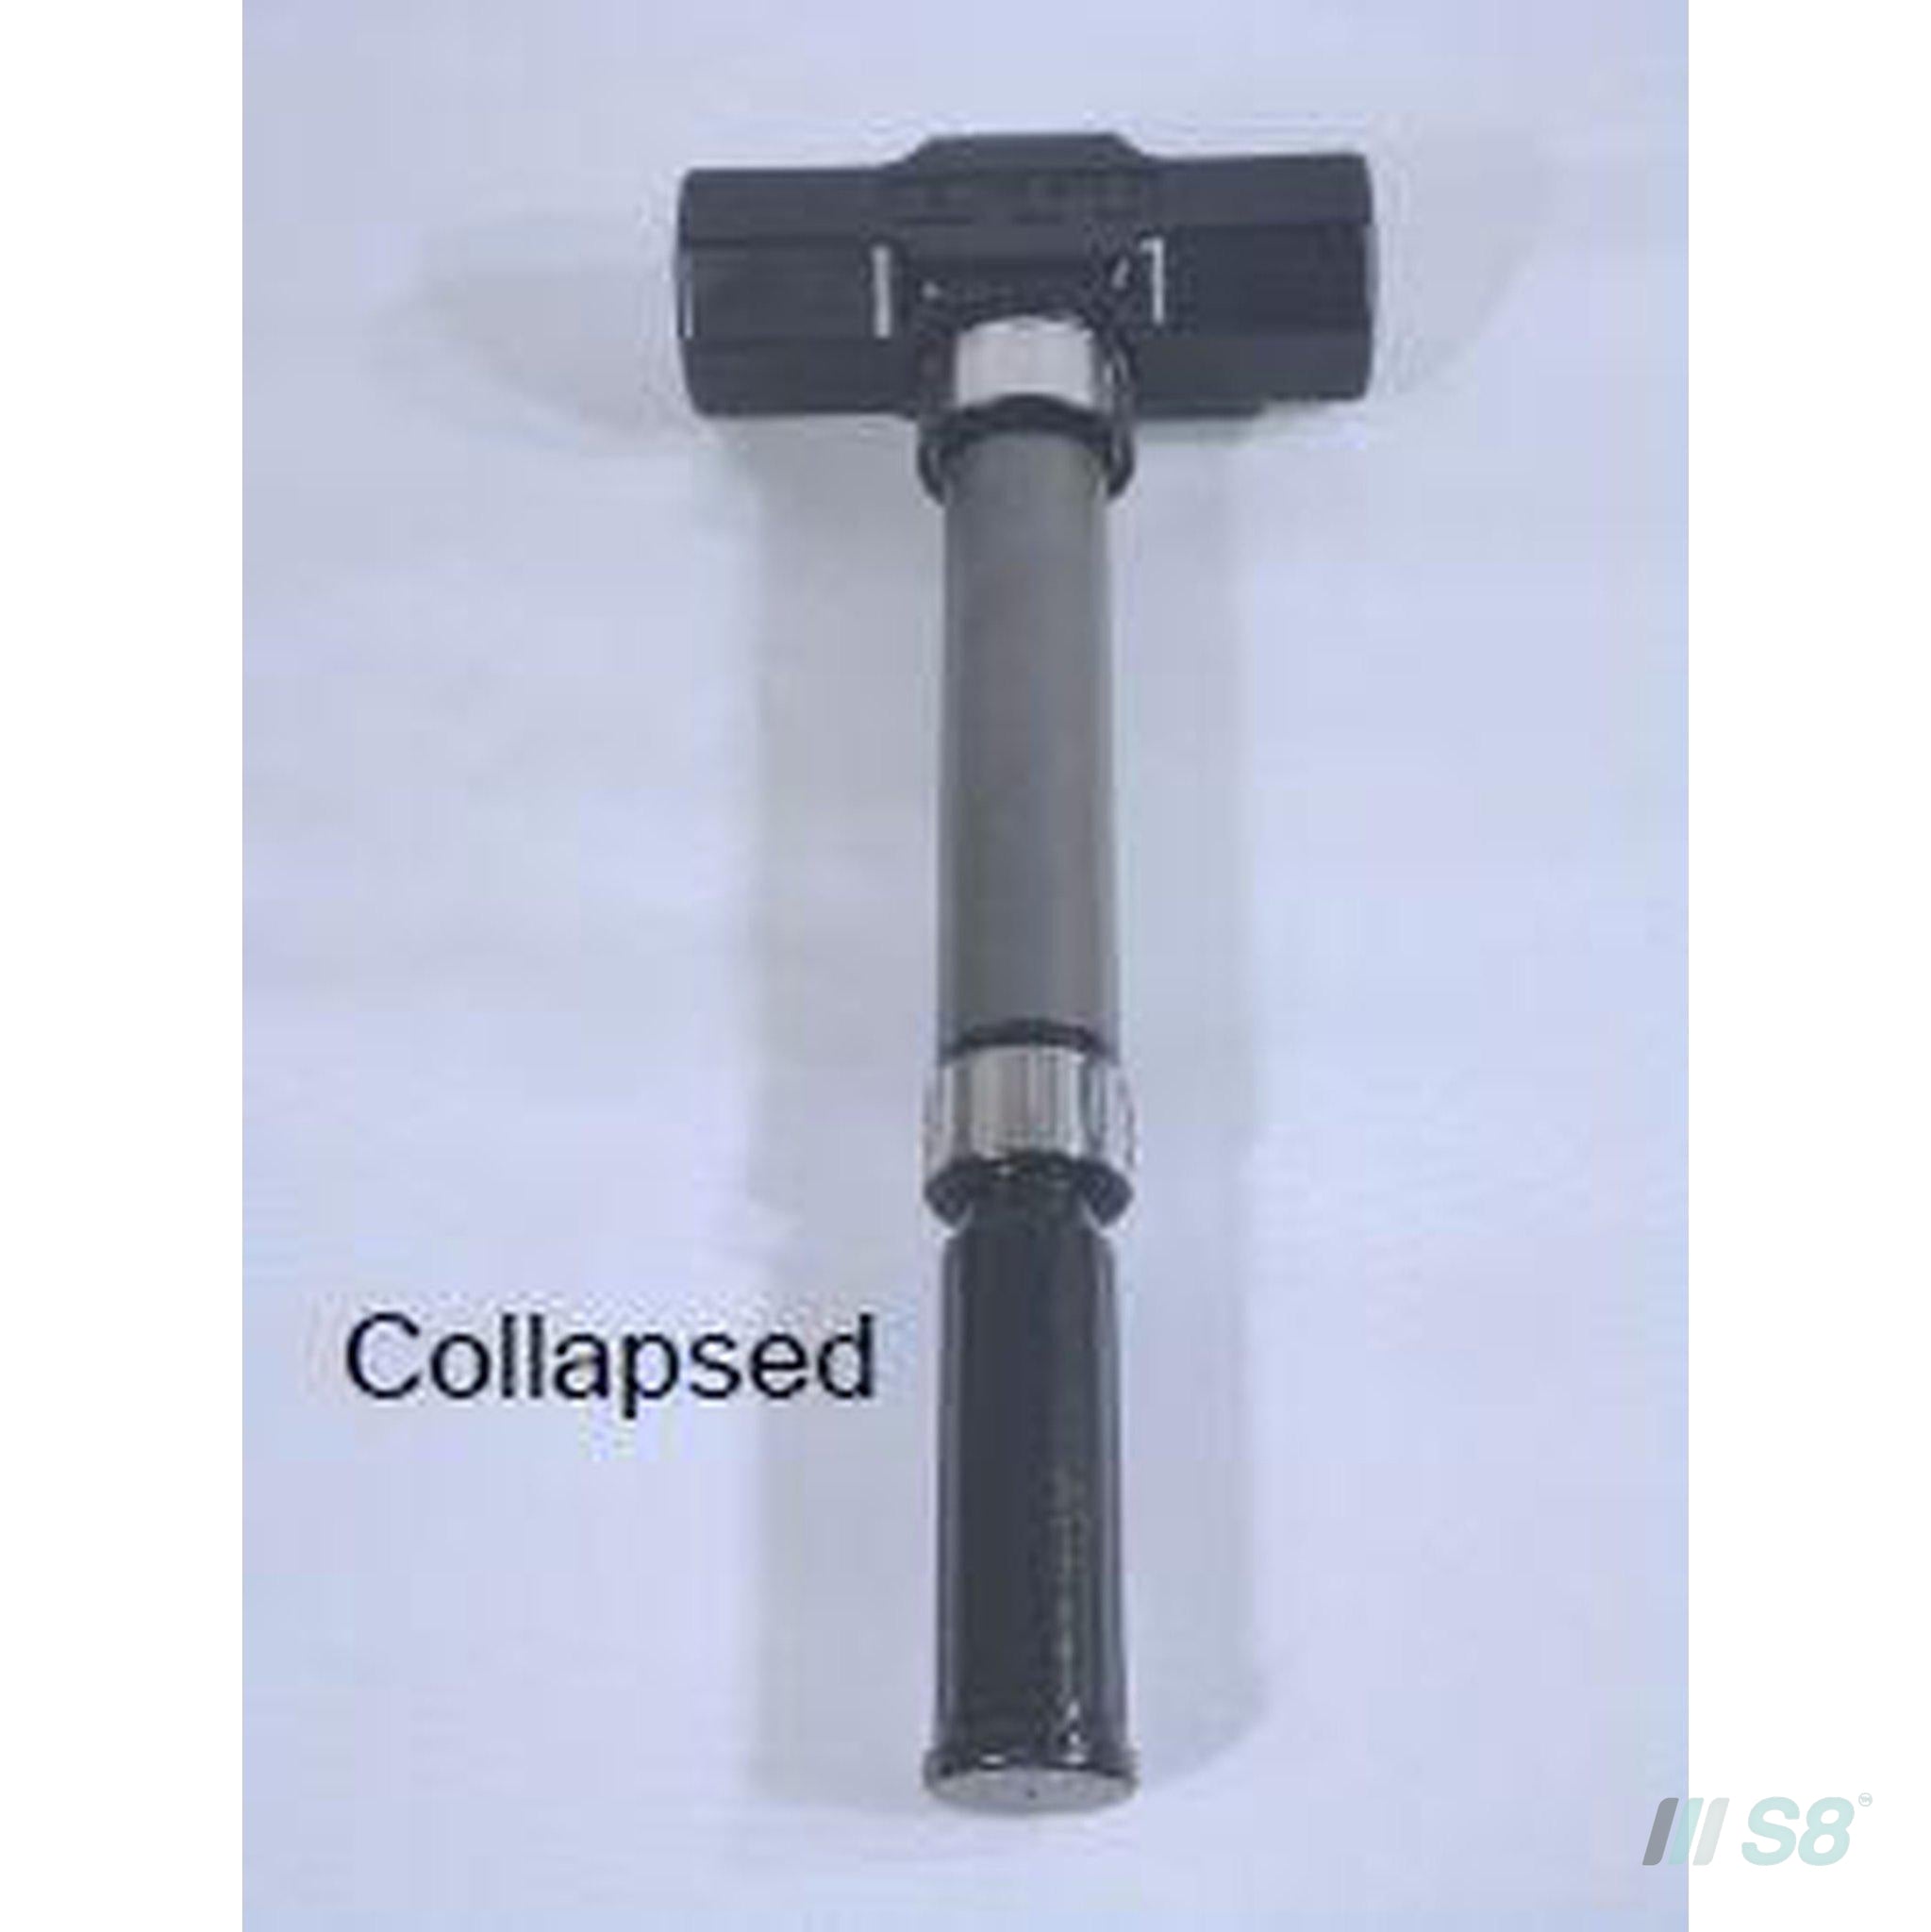 BTI Collapsible Tools-BTI-S8 Products Group